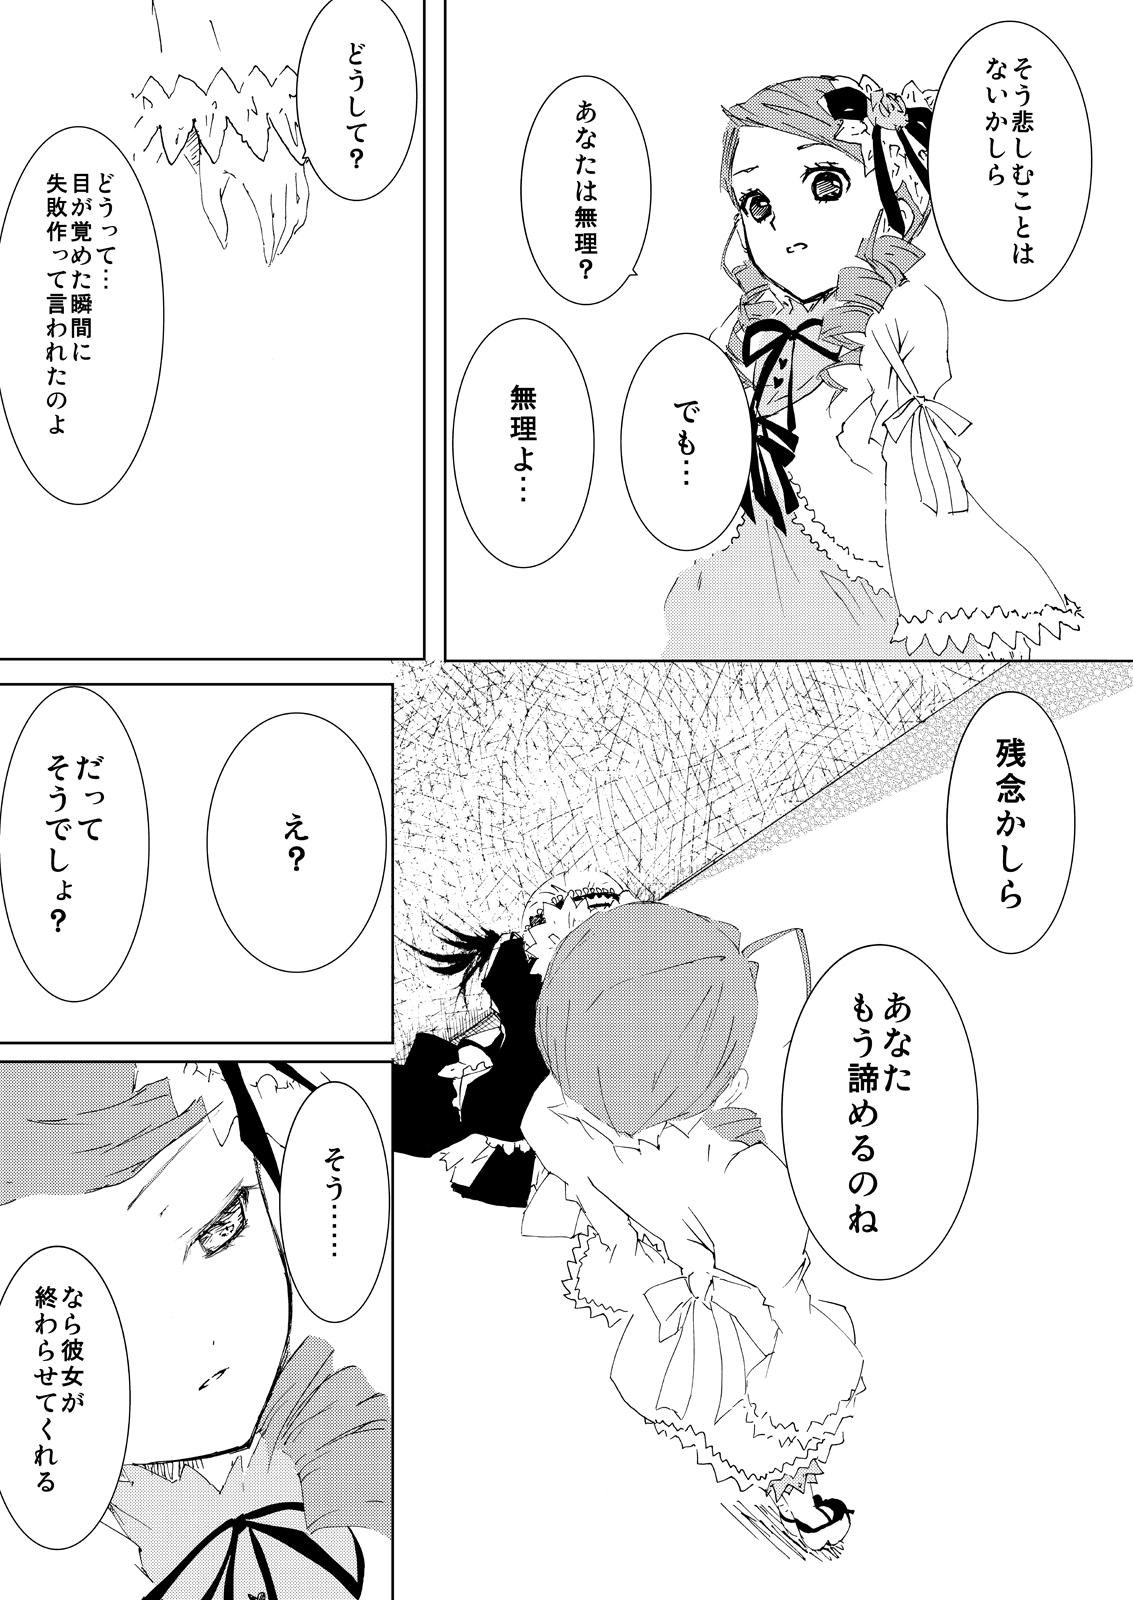 Seduction Baraotome Ramen21 4 - Rozen maiden Old Vs Young - Page 8